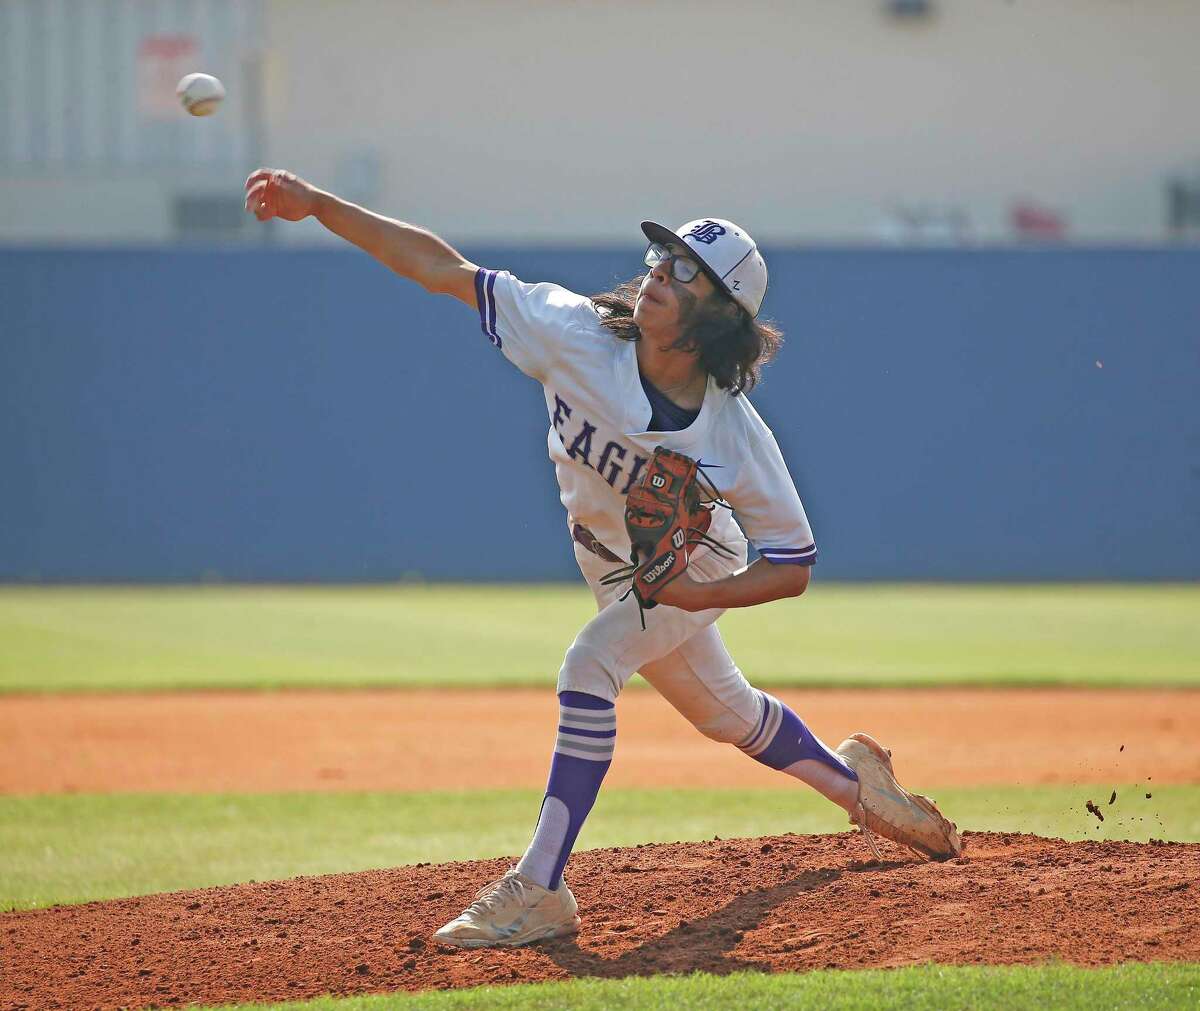 Brackenridge winning pitcher Hector Quiroga (11) delivers during Game 2 of a Class 5A baseball first-round playoff. Brack defeated Medina Valley 8-1 forcing a third game on Saturday, May 7, 2022 at SAISD Sports Complex.